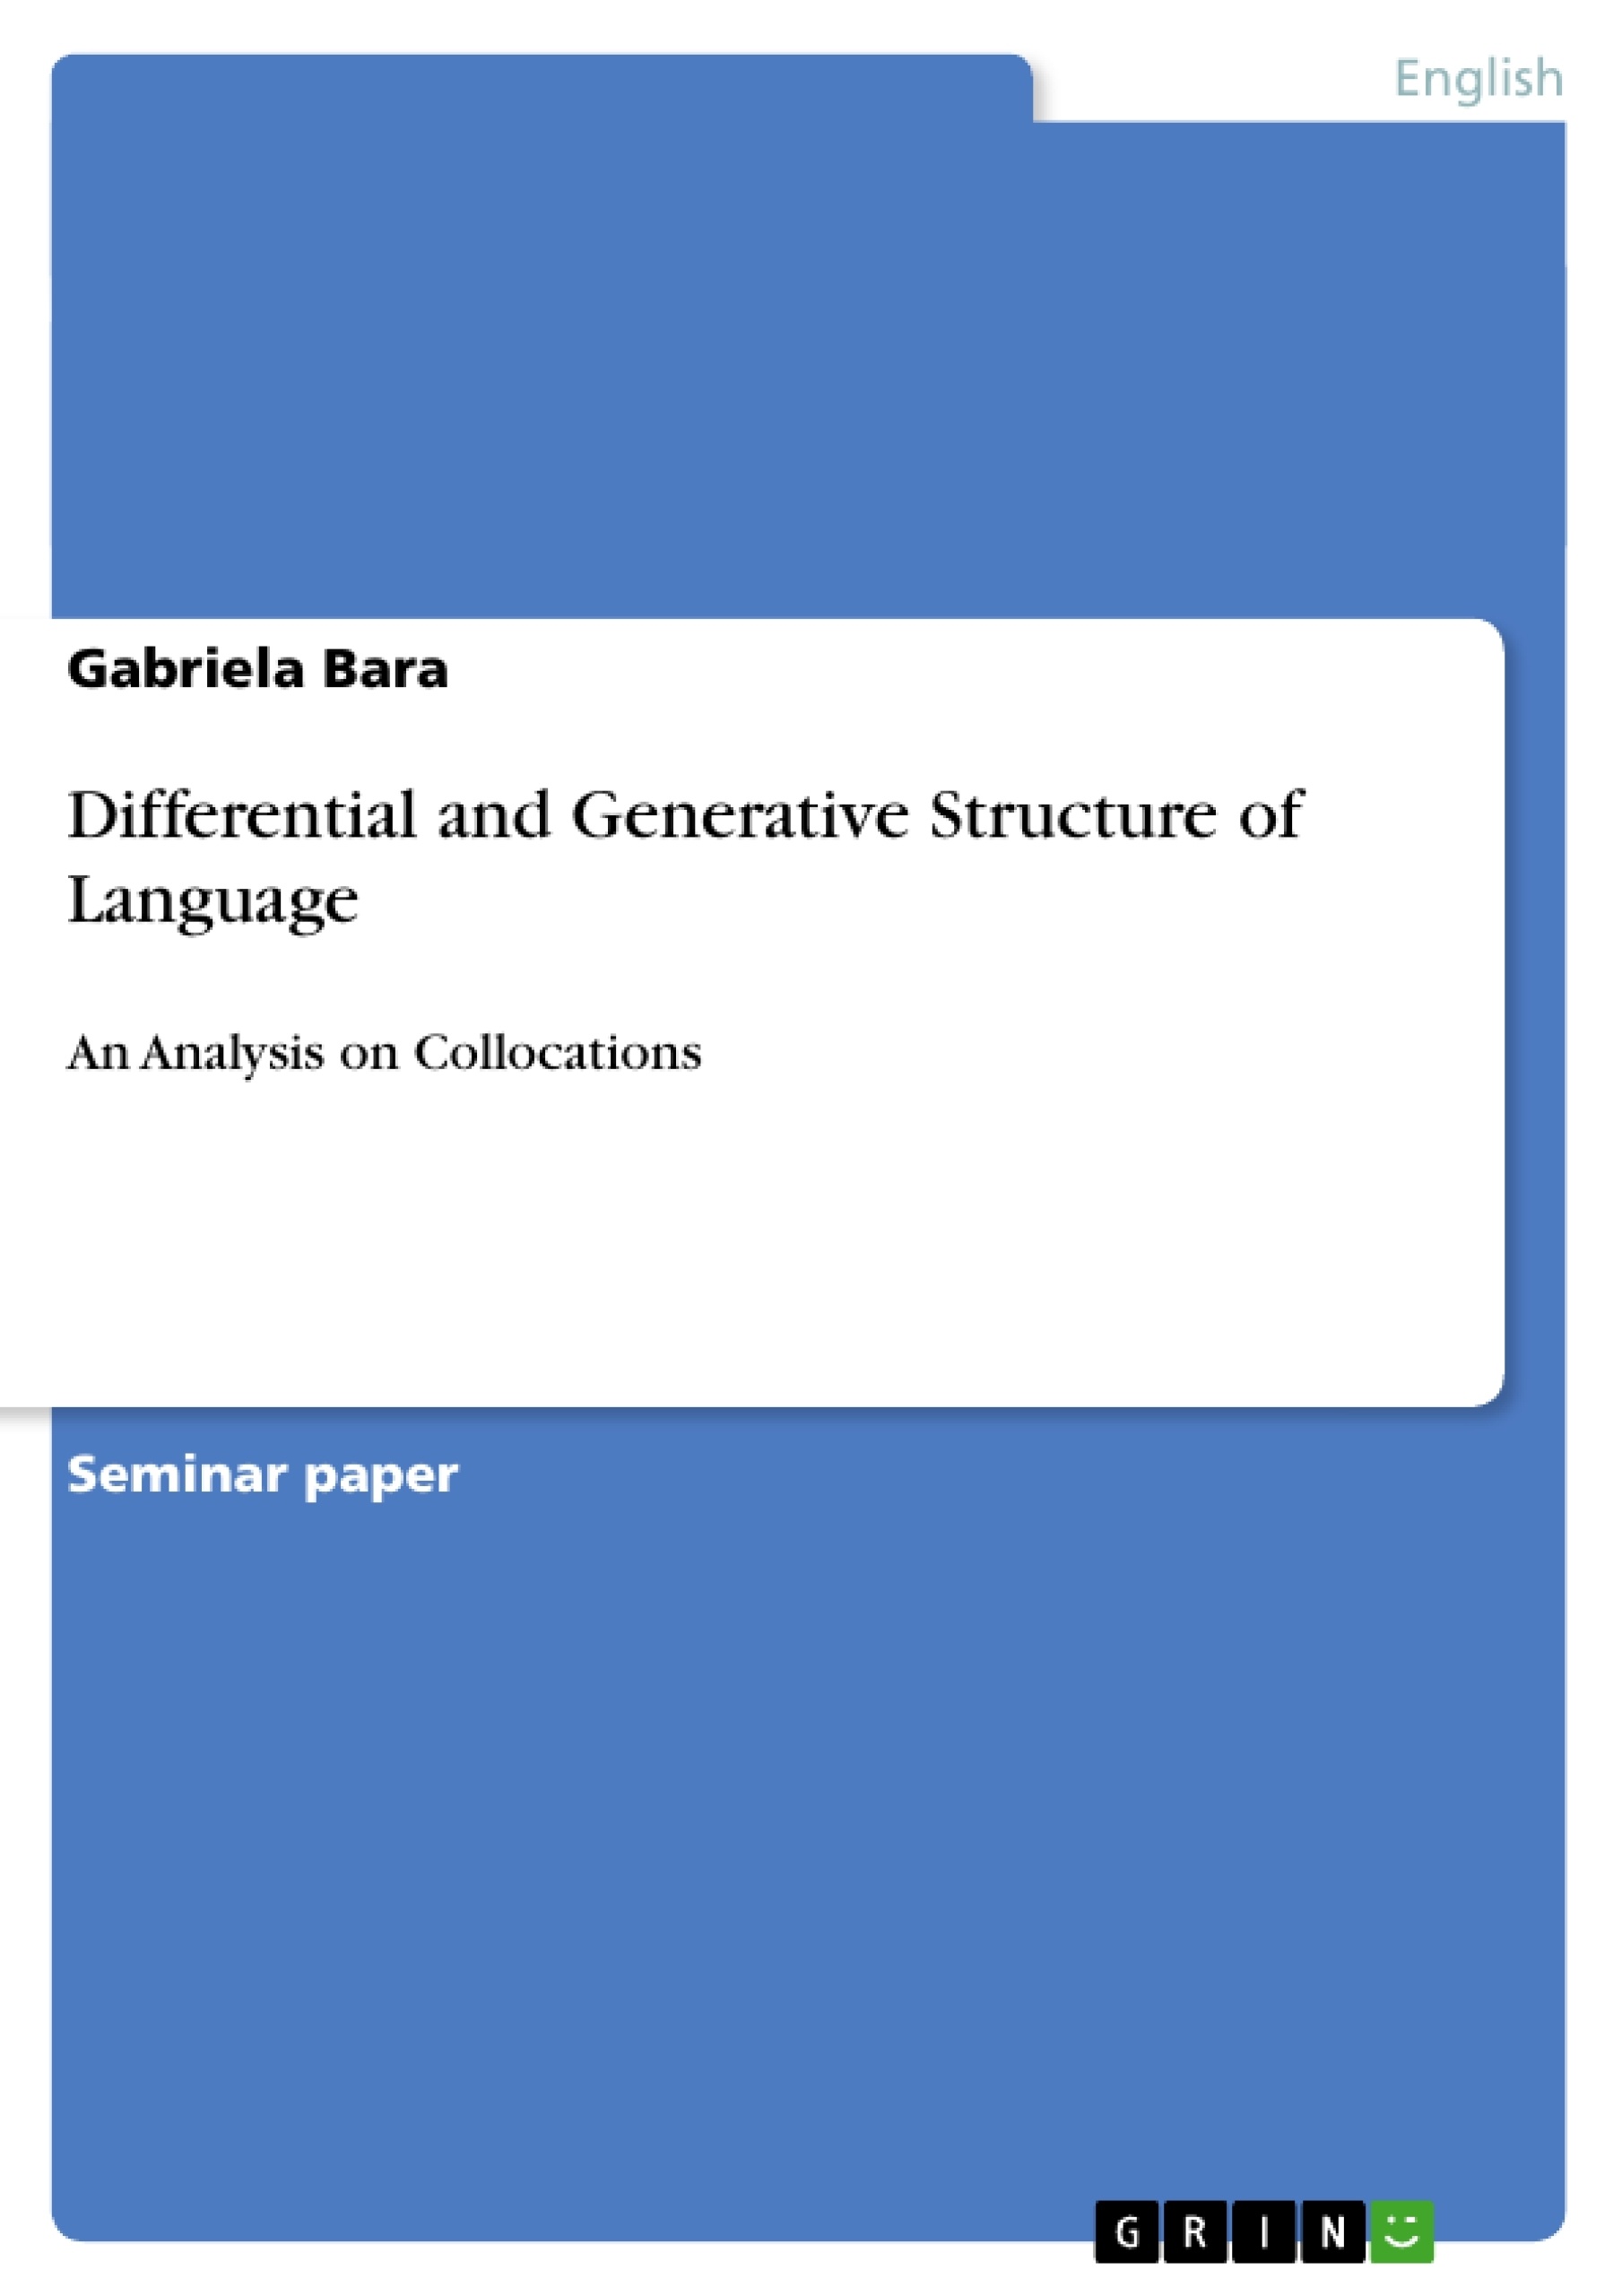 Title: Differential and Generative Structure of Language